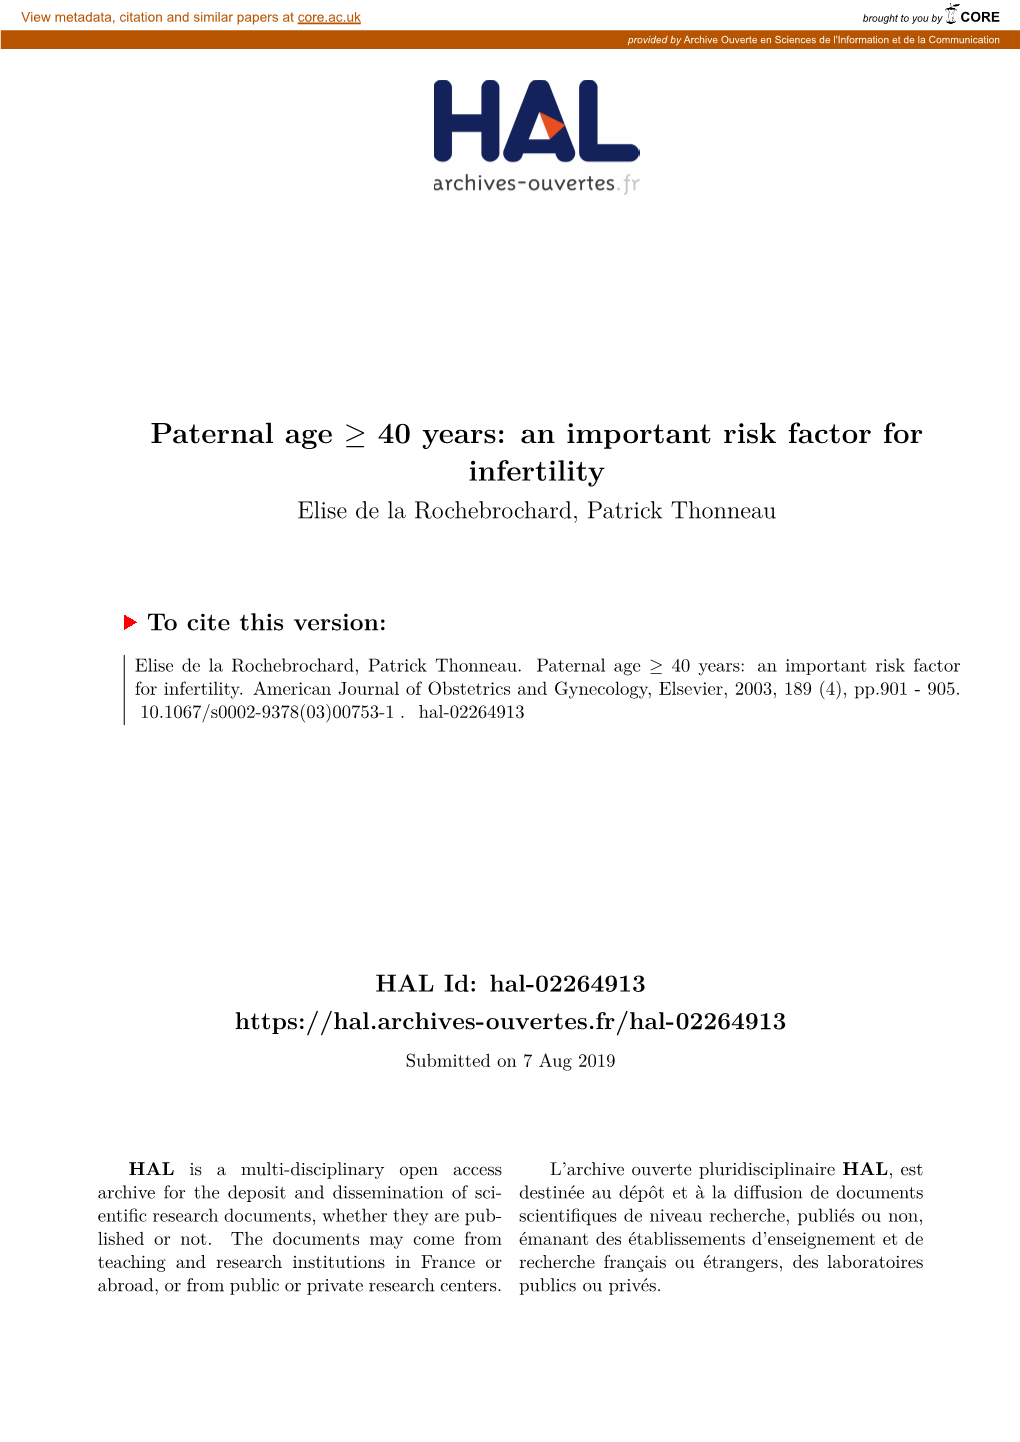 Paternal Age 40 Years: an Important Risk Factor for Infertility